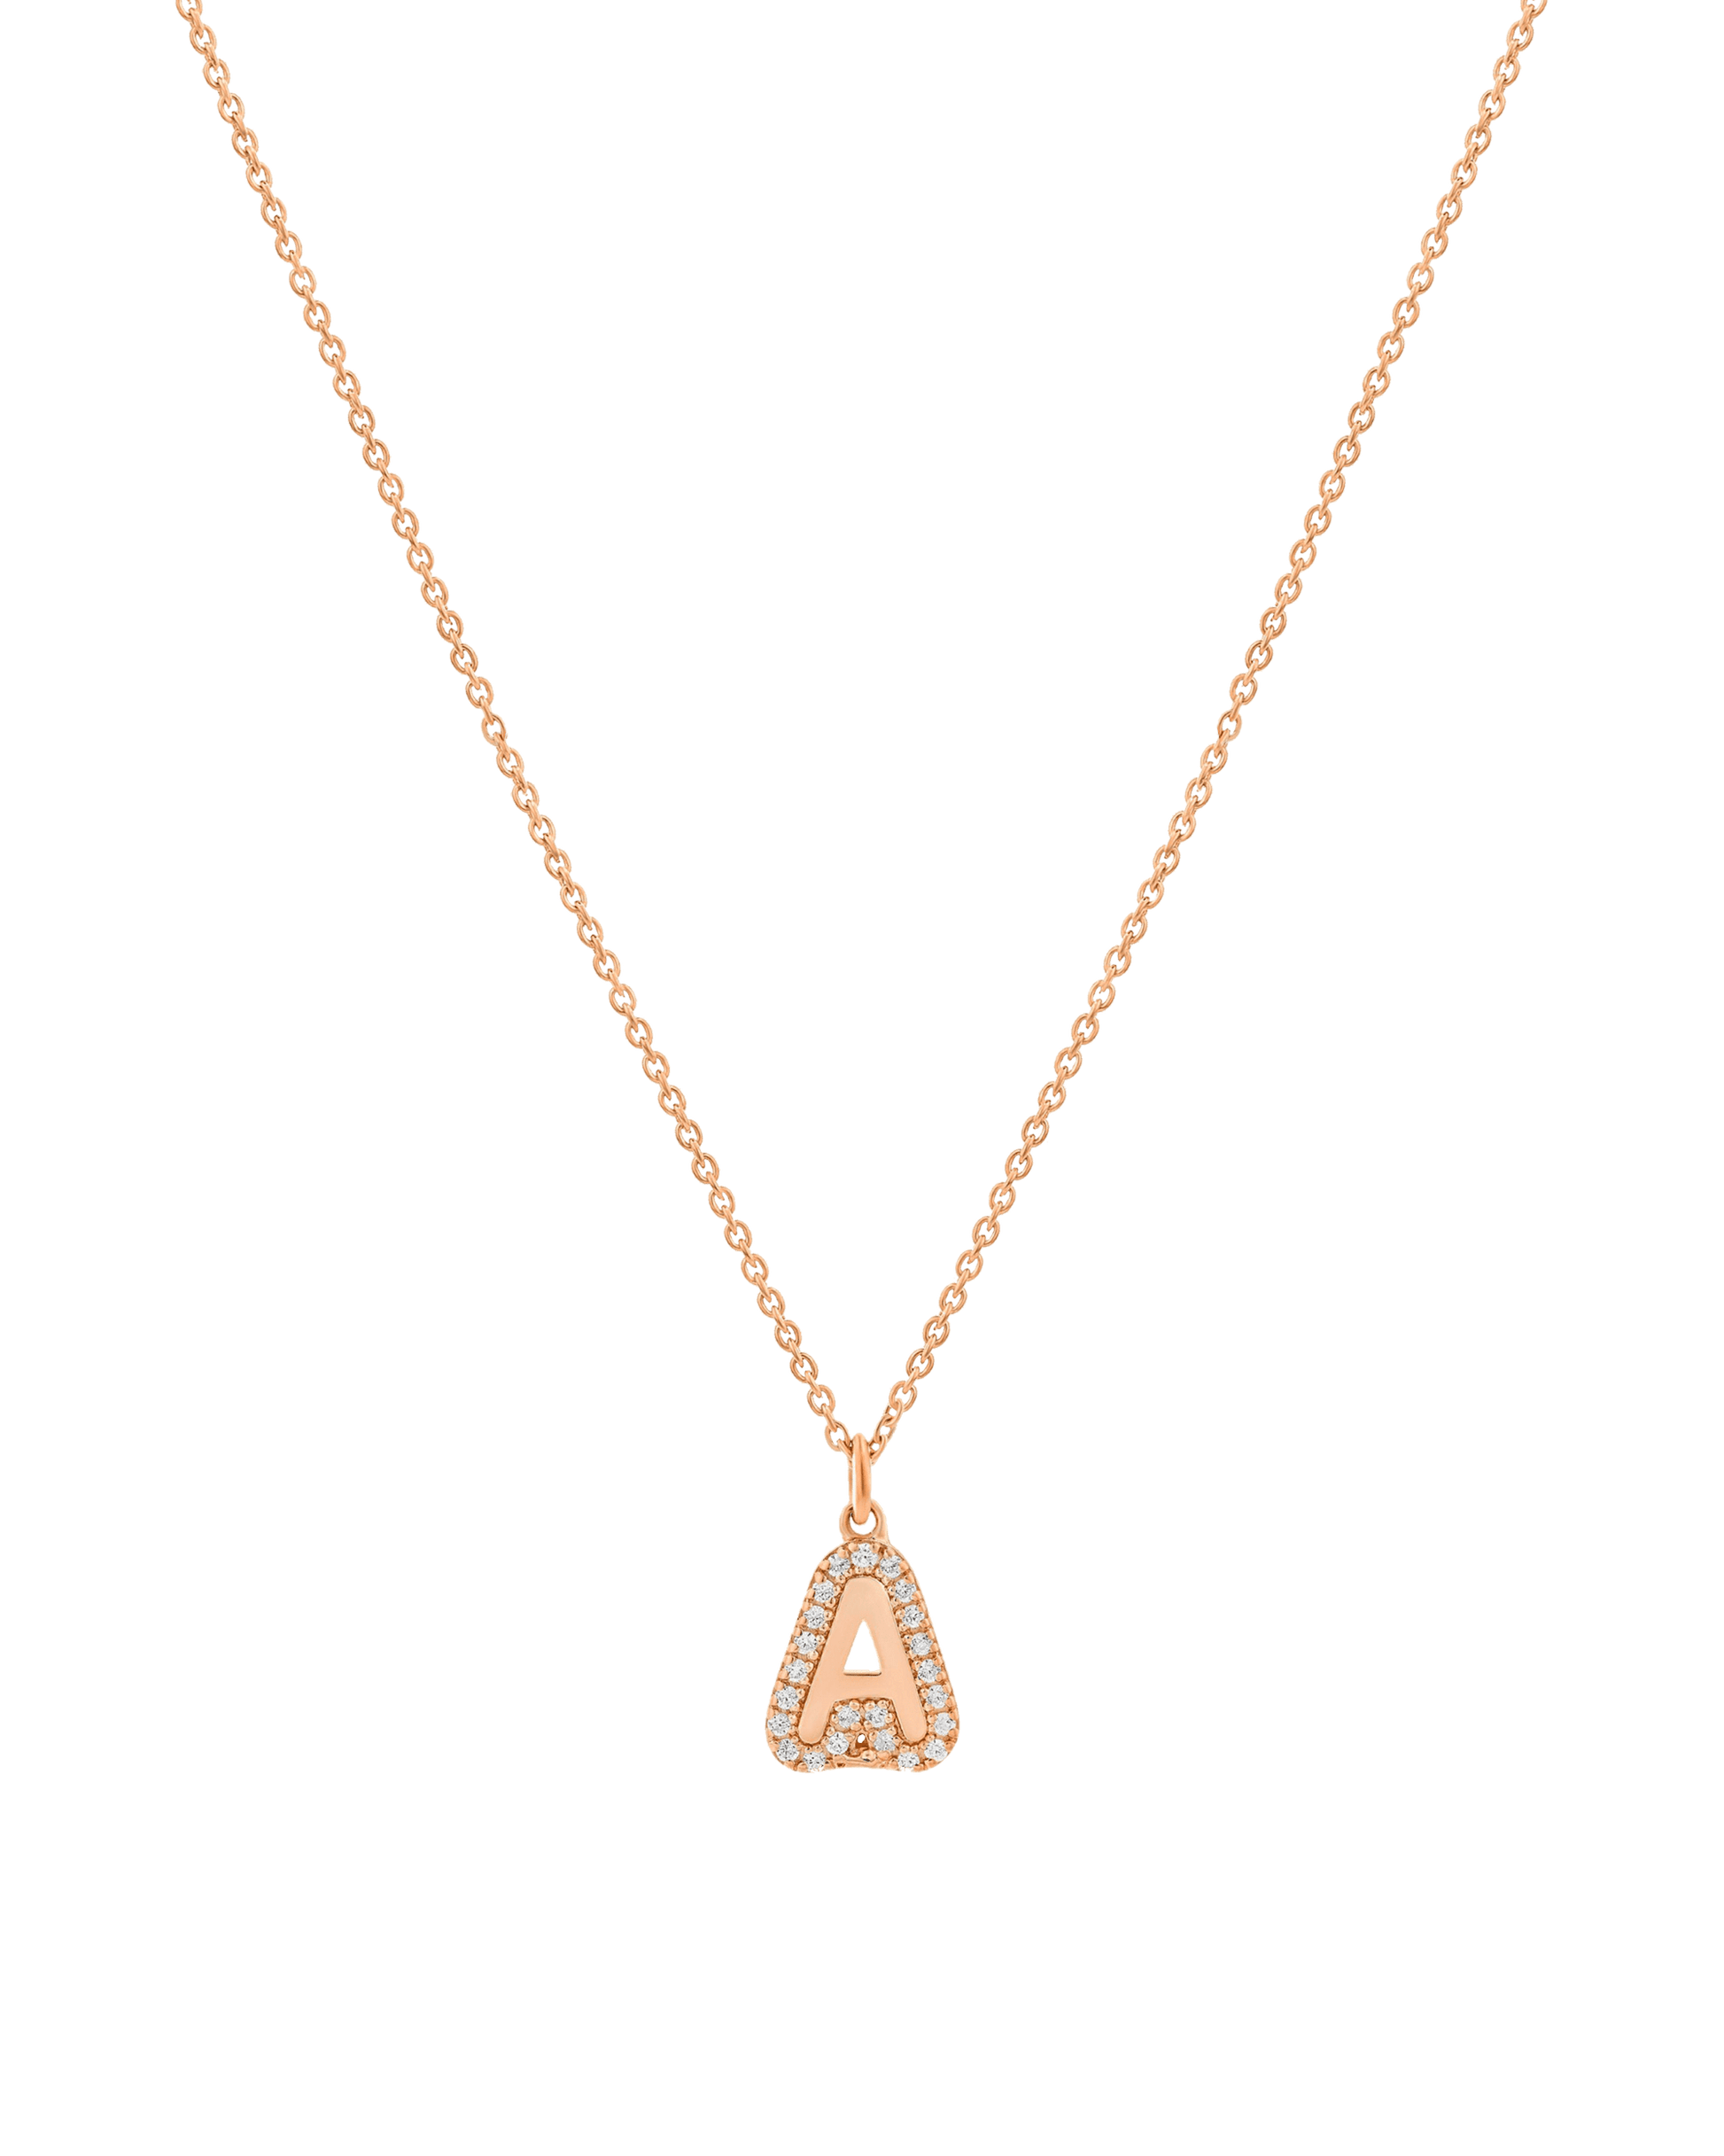 Diamond Bubble Initial Necklace - 14K White Gold Necklaces 14K Solid Gold 